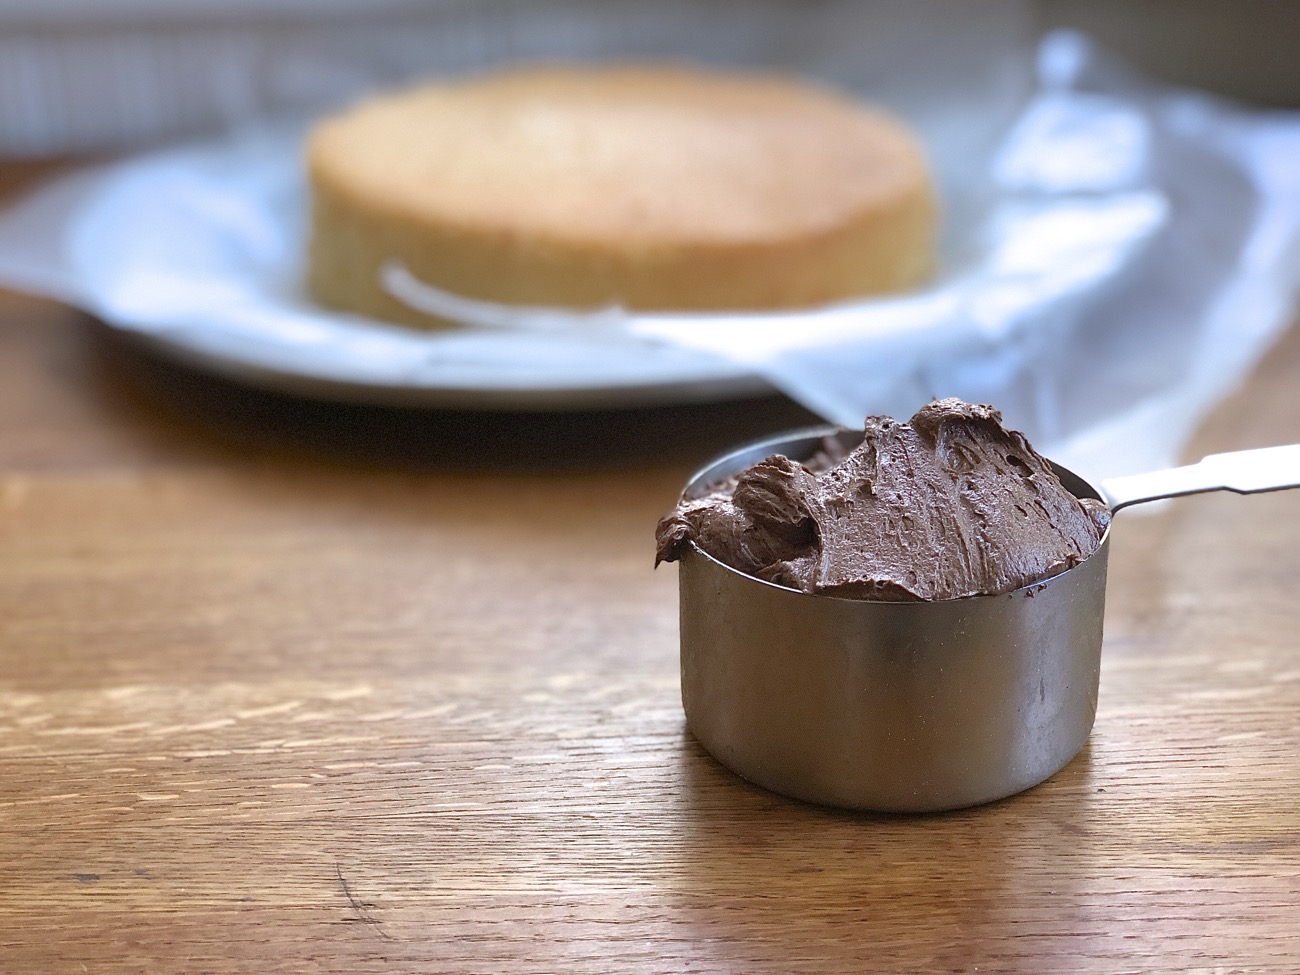 A 1-cup measure of chocolate frosting ready to be spread onto a layer cake.